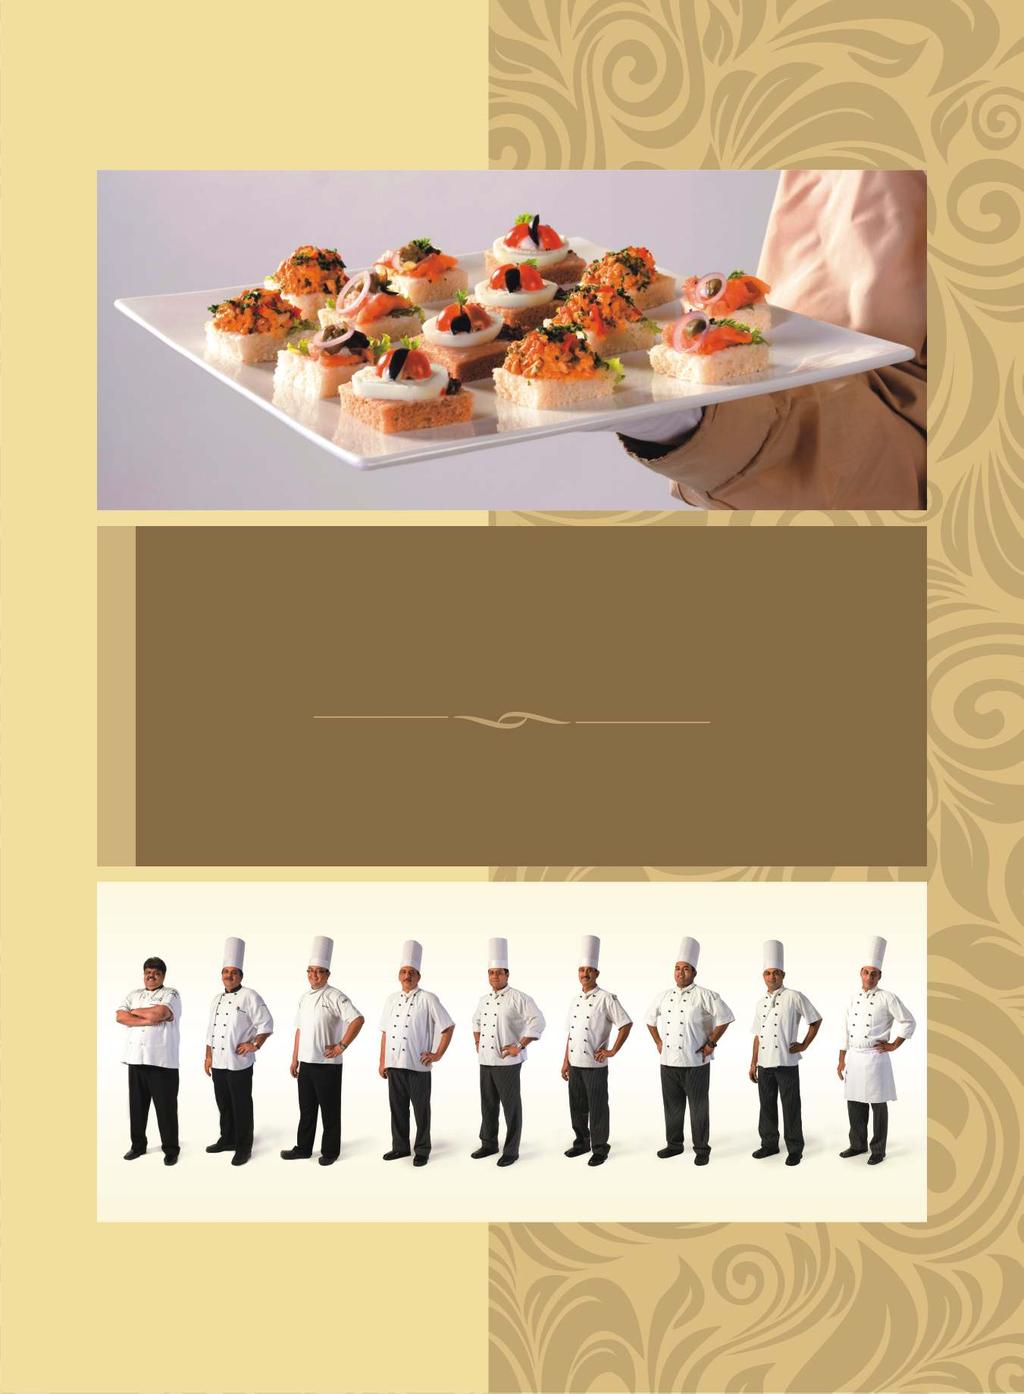 Events Etc. is the catering and entertainment division of Old World Hospitality Pvt. Ltd. (O.W.H.).